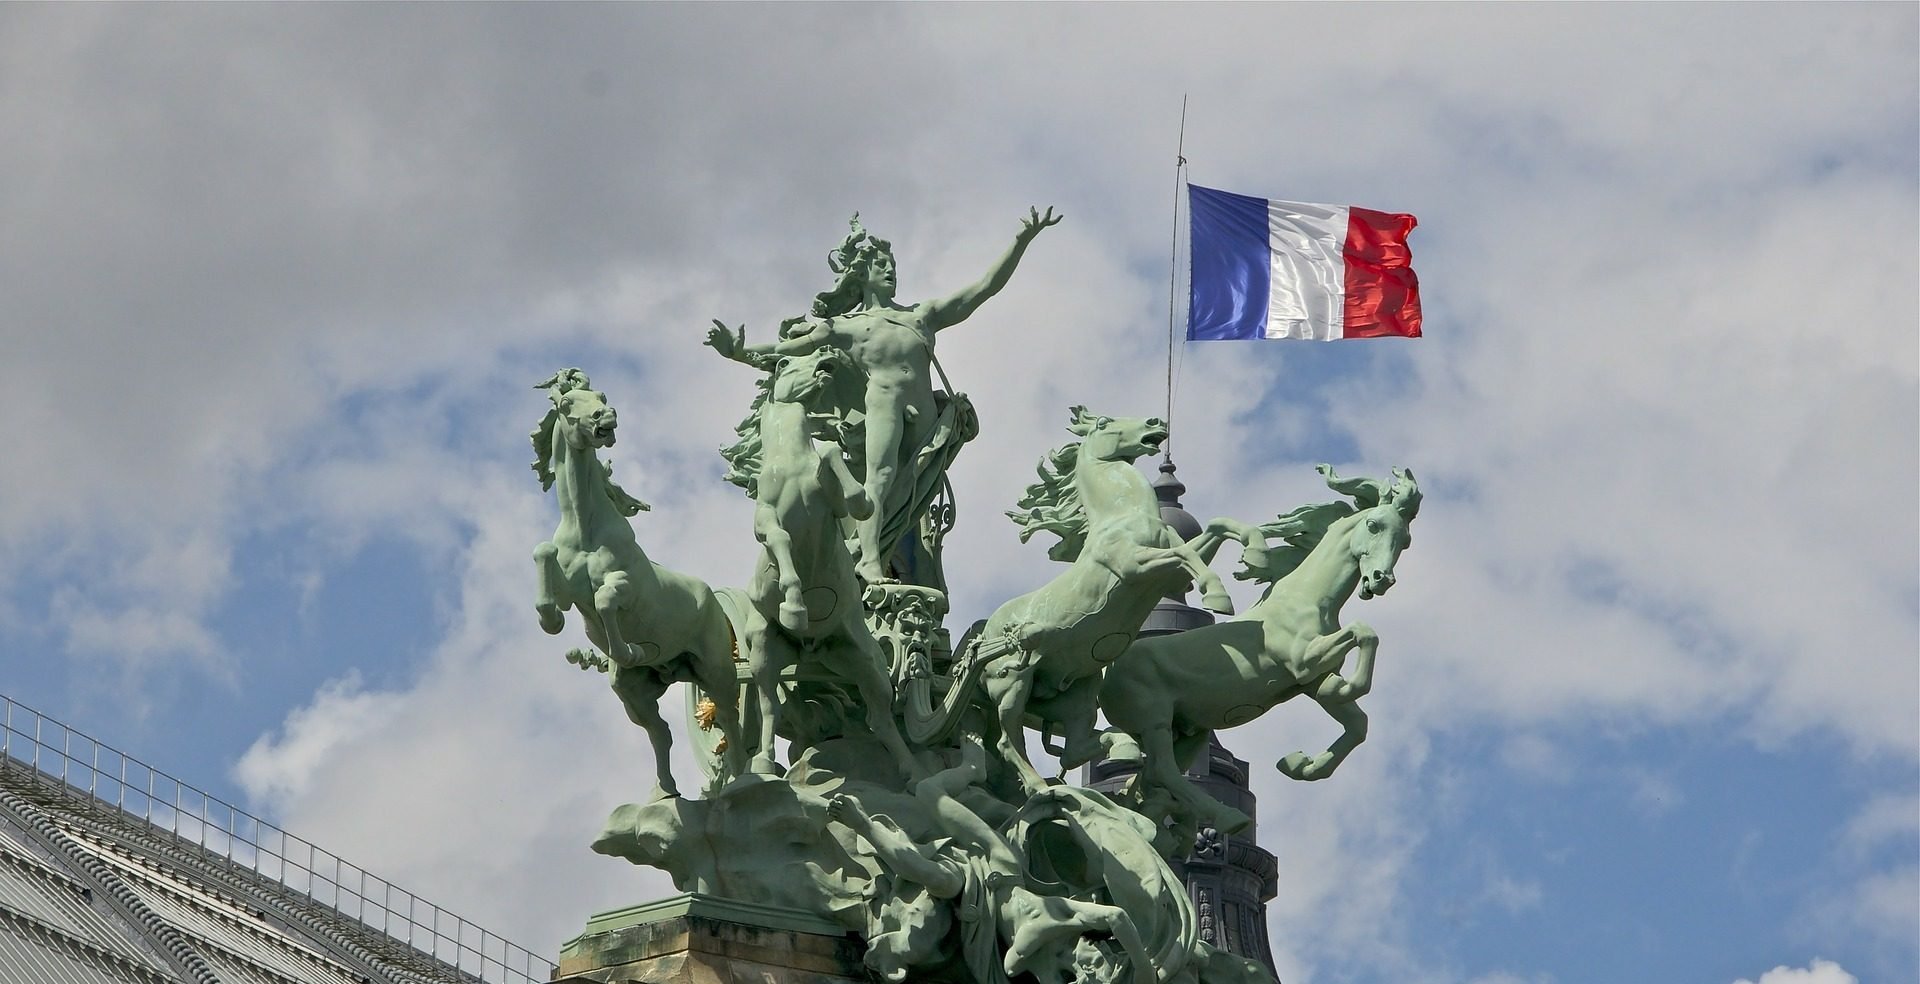 Statue in France